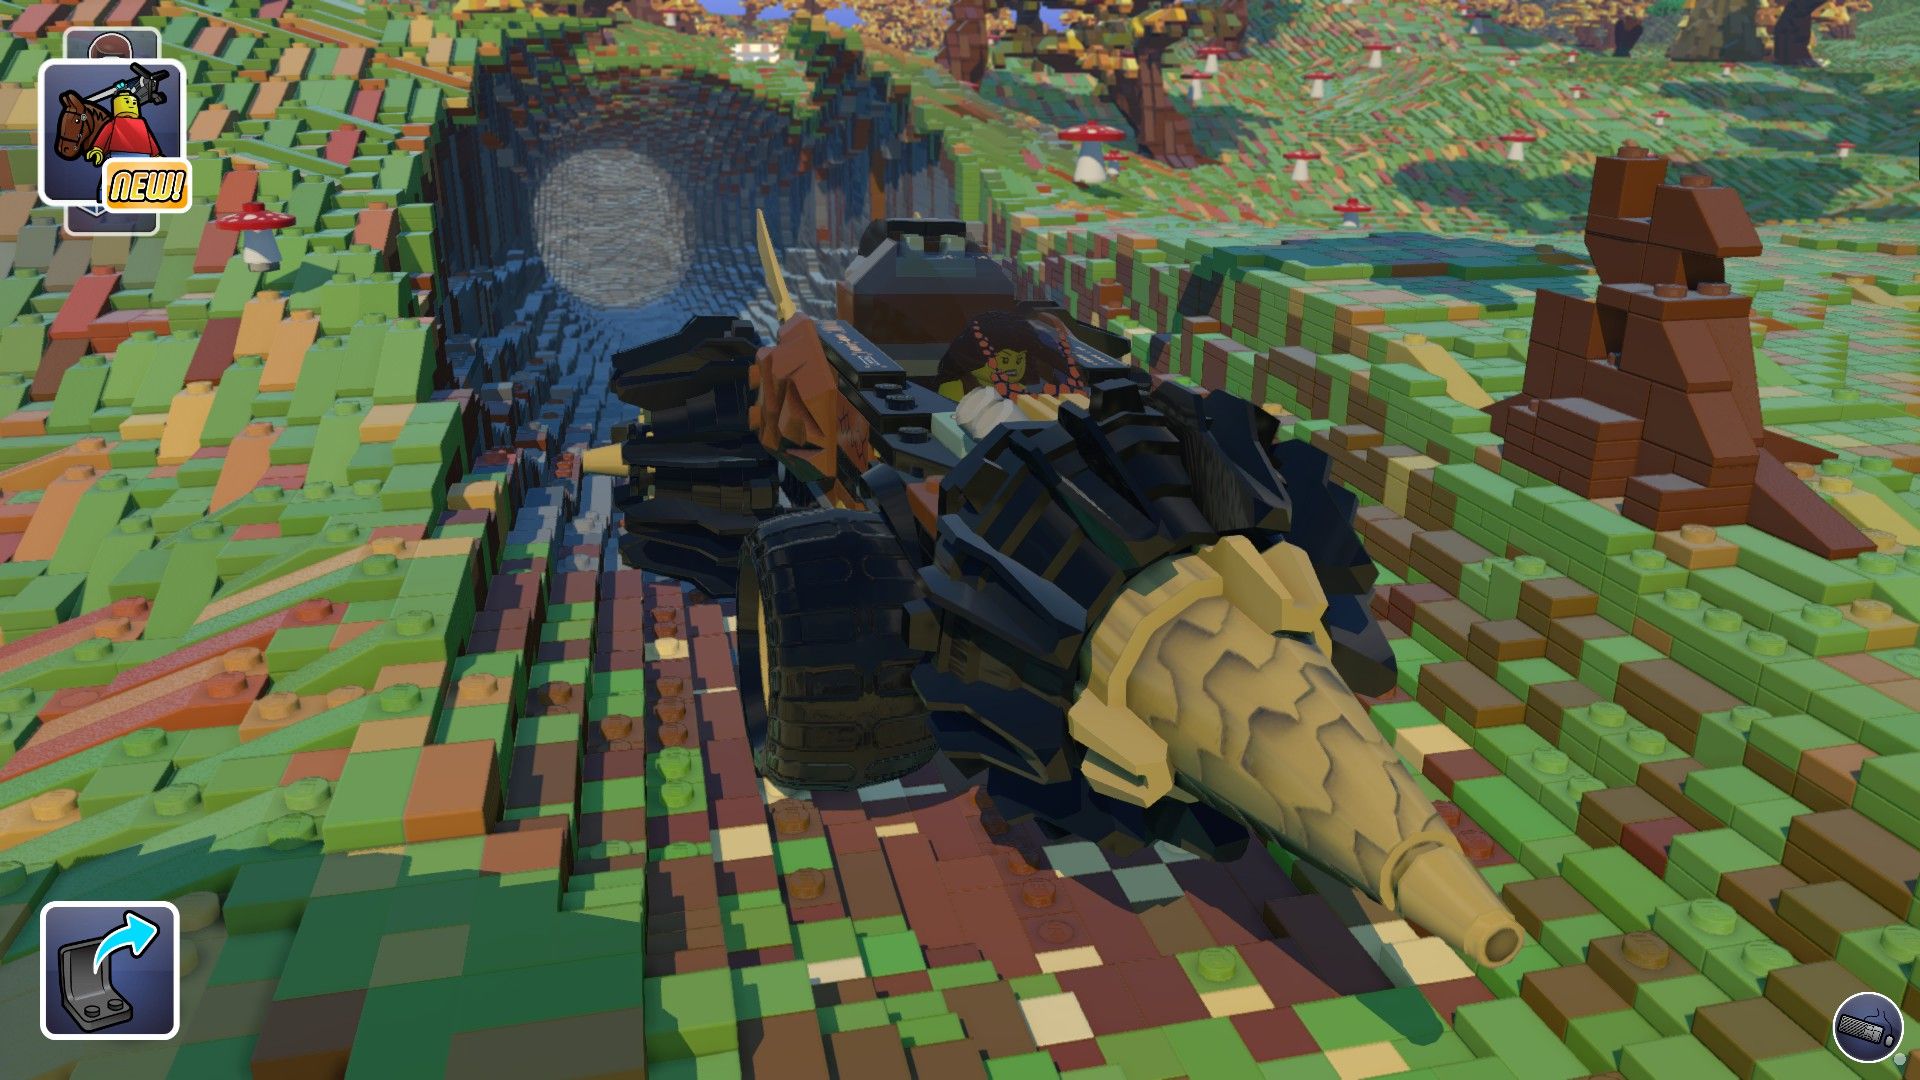 Updates that would take ‘lego worlds’ up a notch